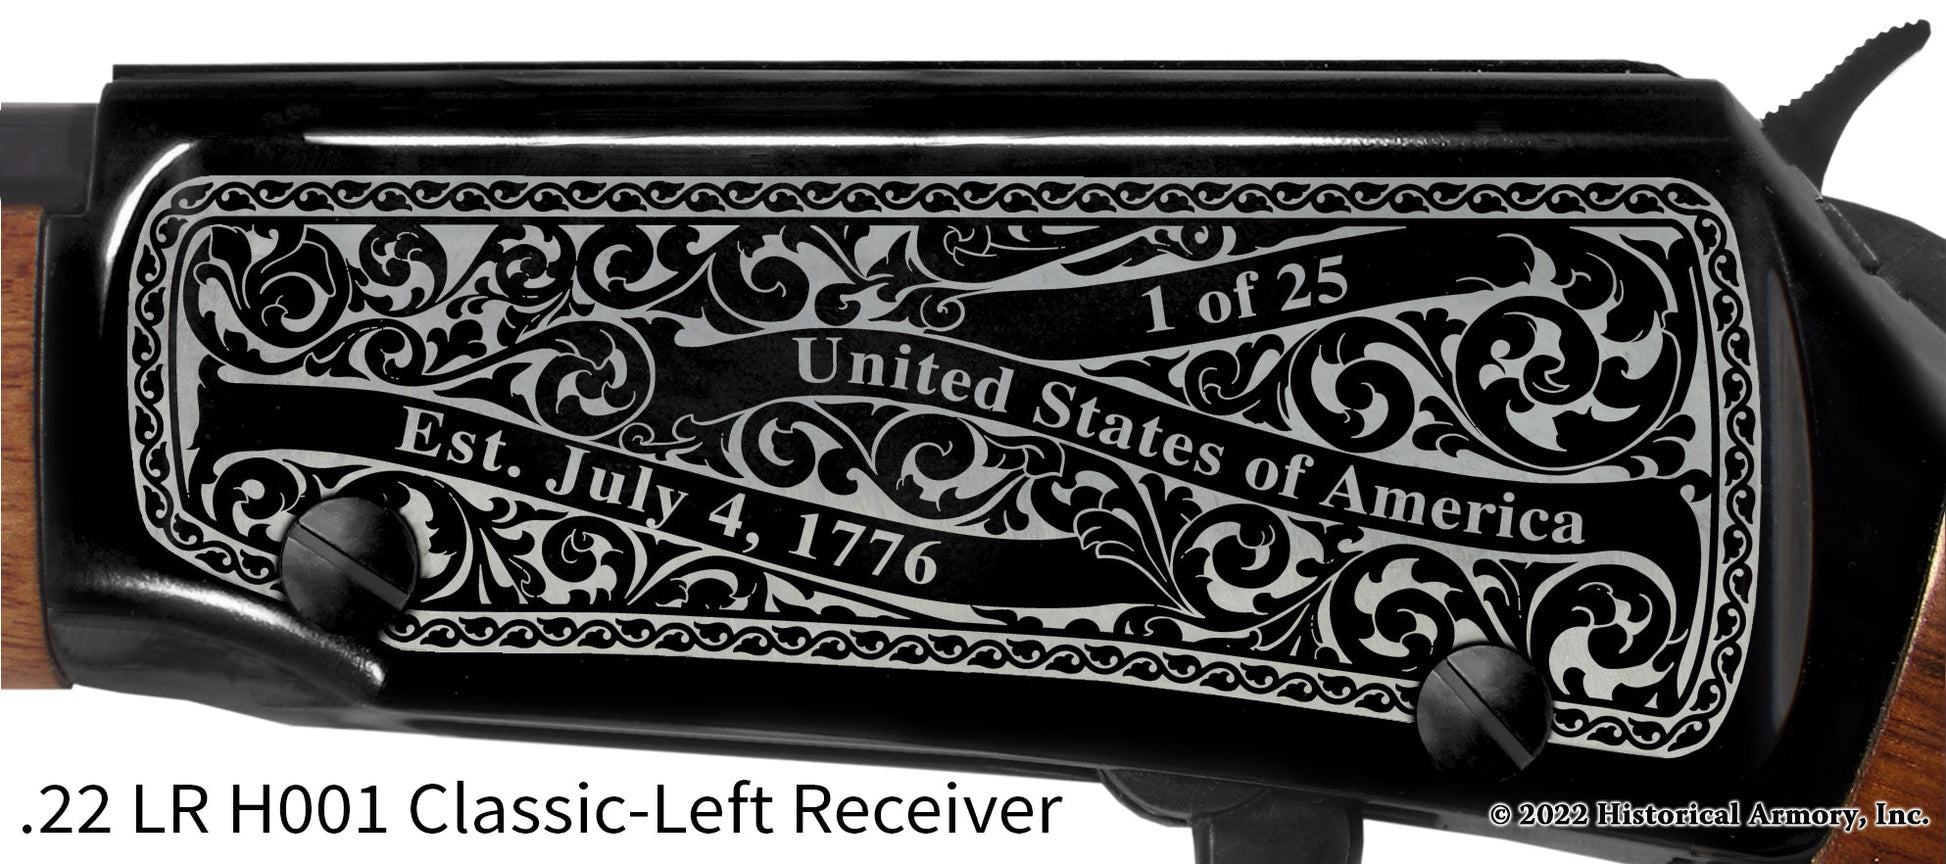 Lewis County West Virginia Engraved Henry H001 Rifle